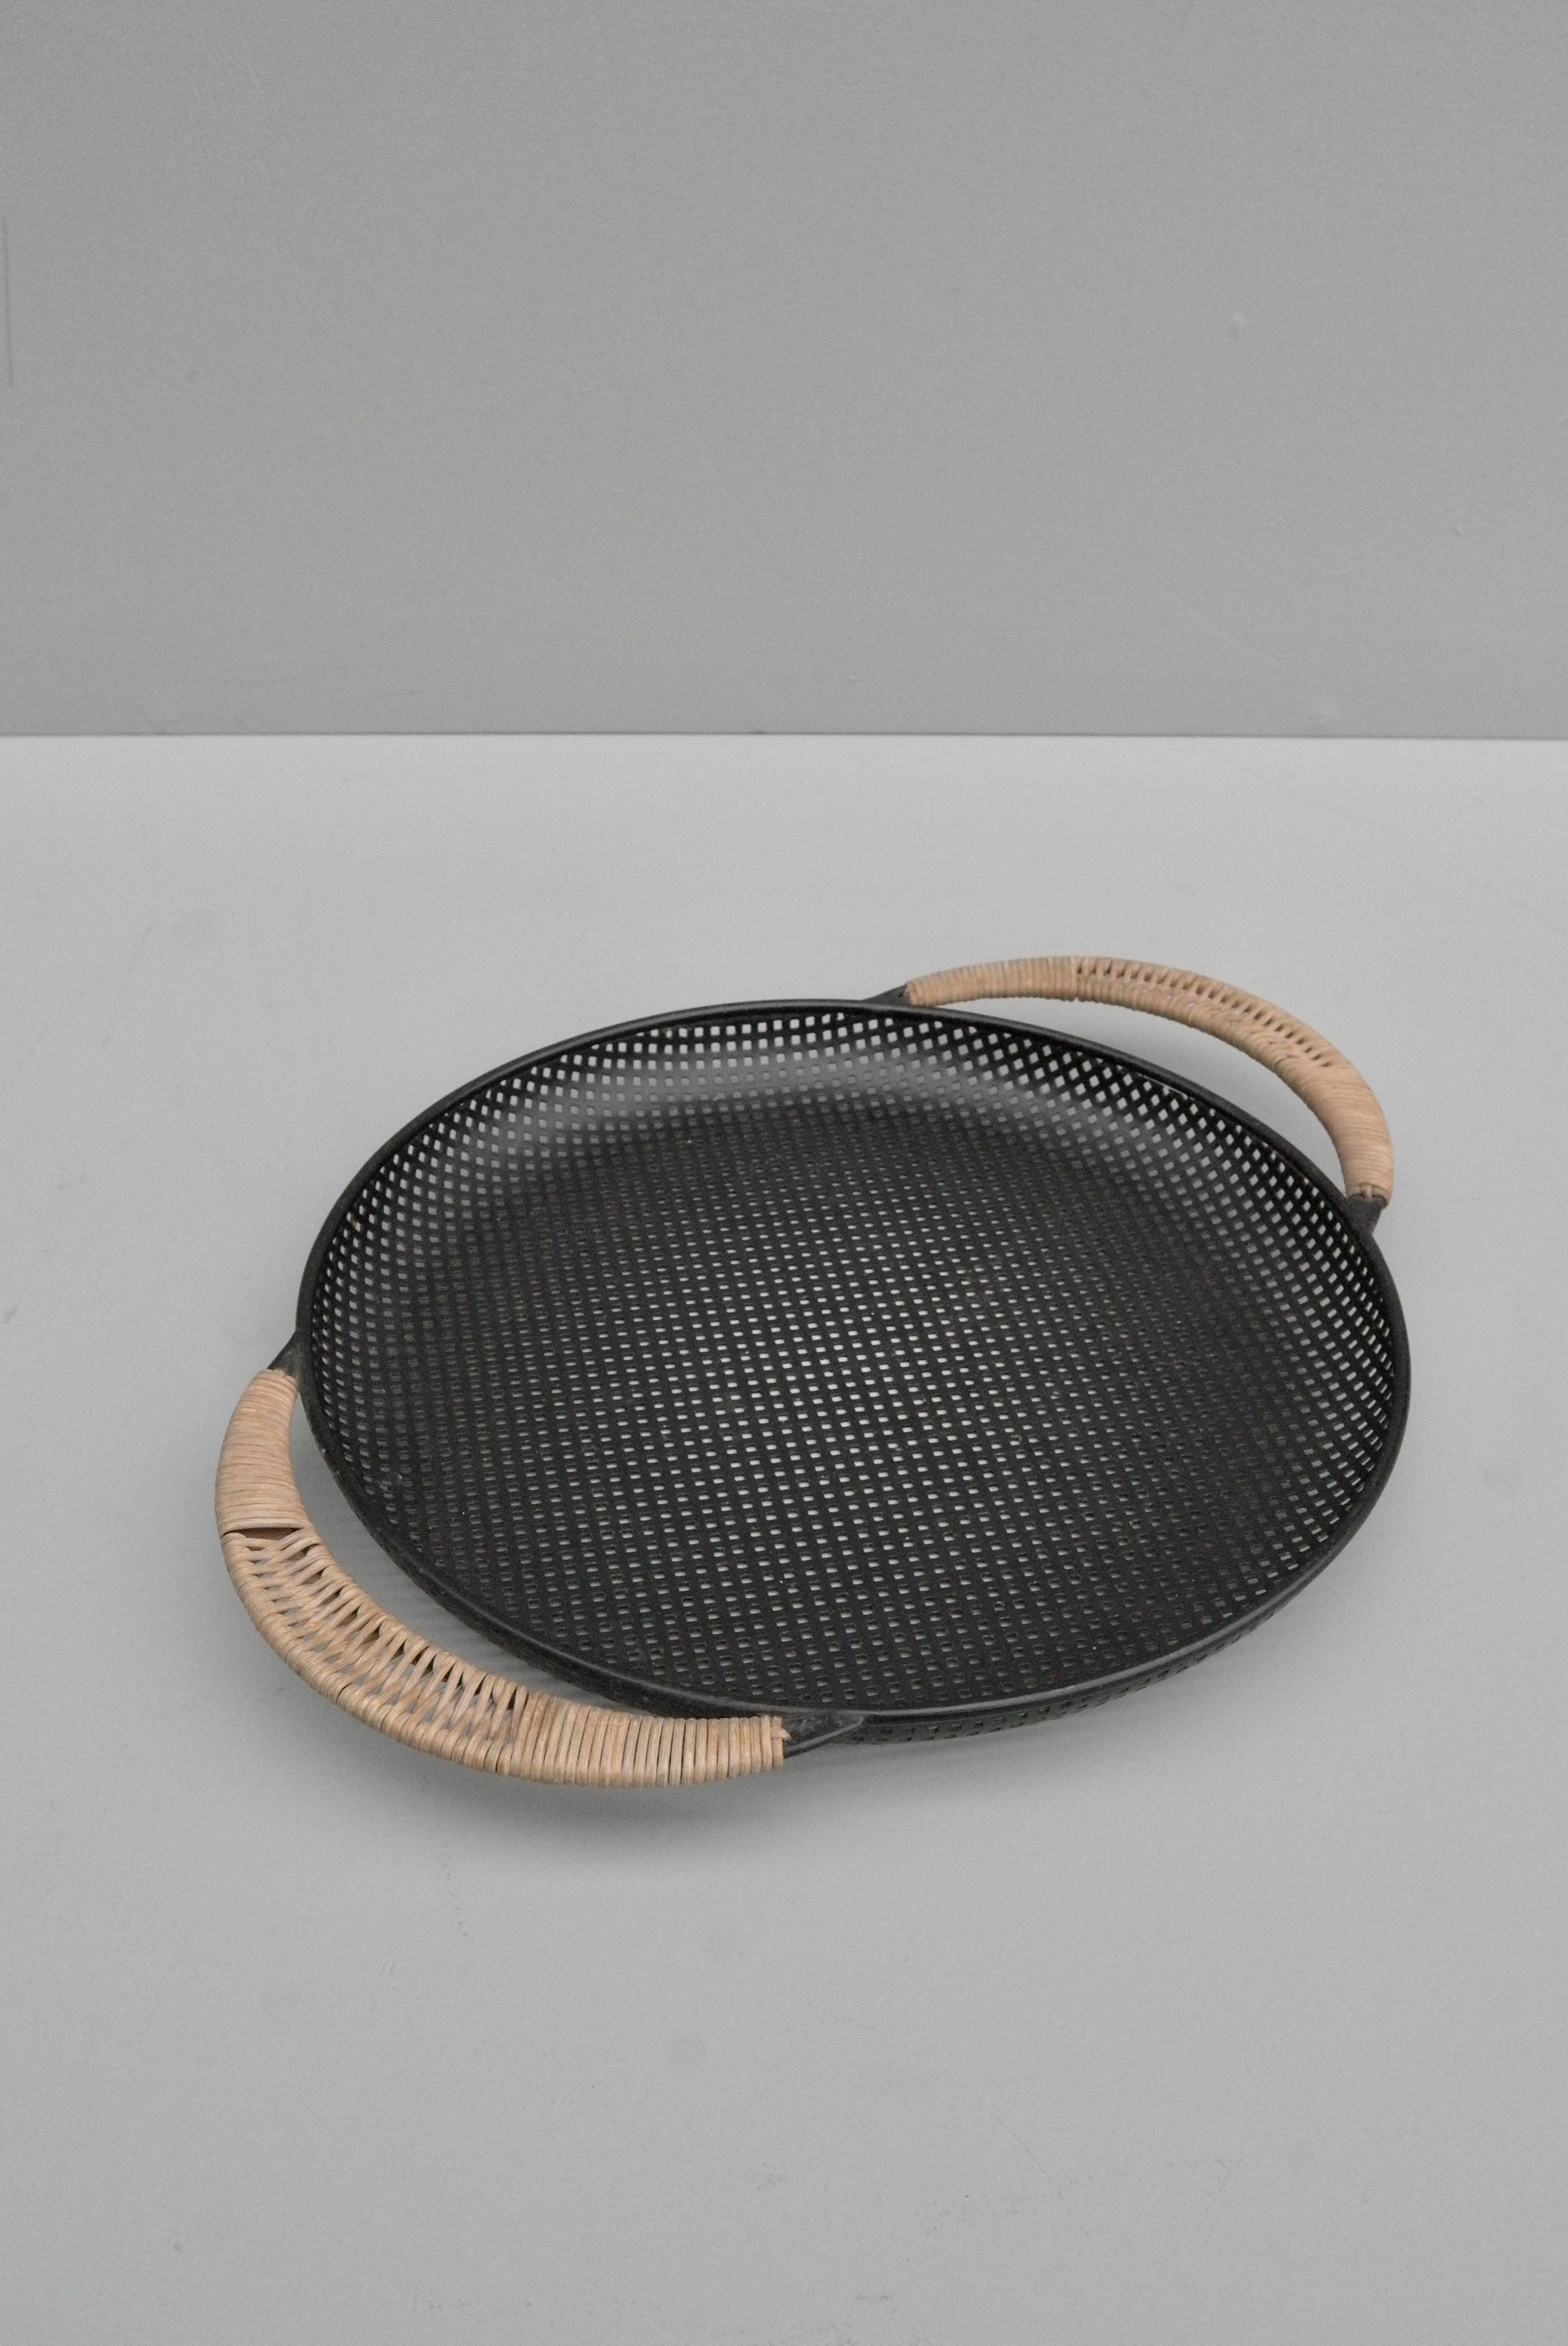 Black metal Rotin tray designed by Mathieu Matégot. Manufactured by Ateliers Matégot, France, circa 1950. Lacquered perforated metal with rattan details.